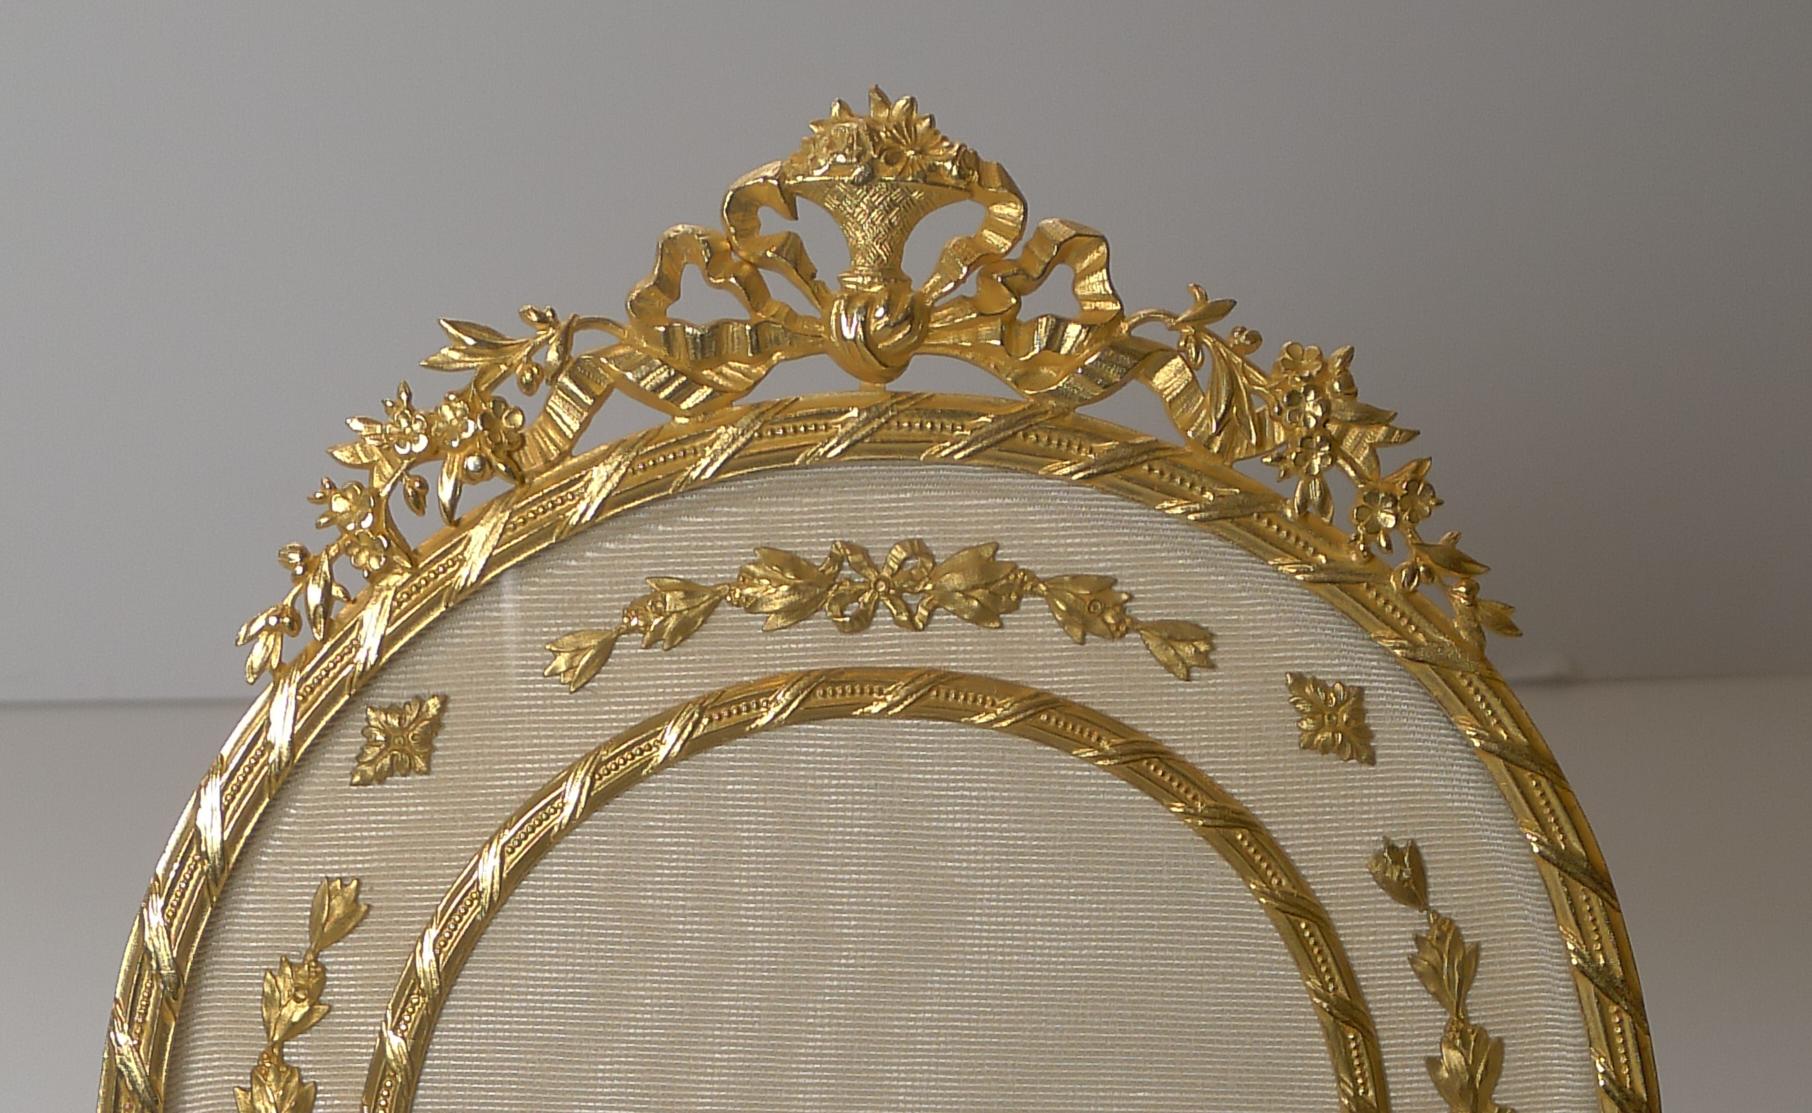 A magnificent and grand photograph frame; if you are looking for a statement piece, this may very well be it.

Made from Ormolu or gilded bronze, it has been meticulously restored to it's former glory with a bright patina, clean silk taffeta and a